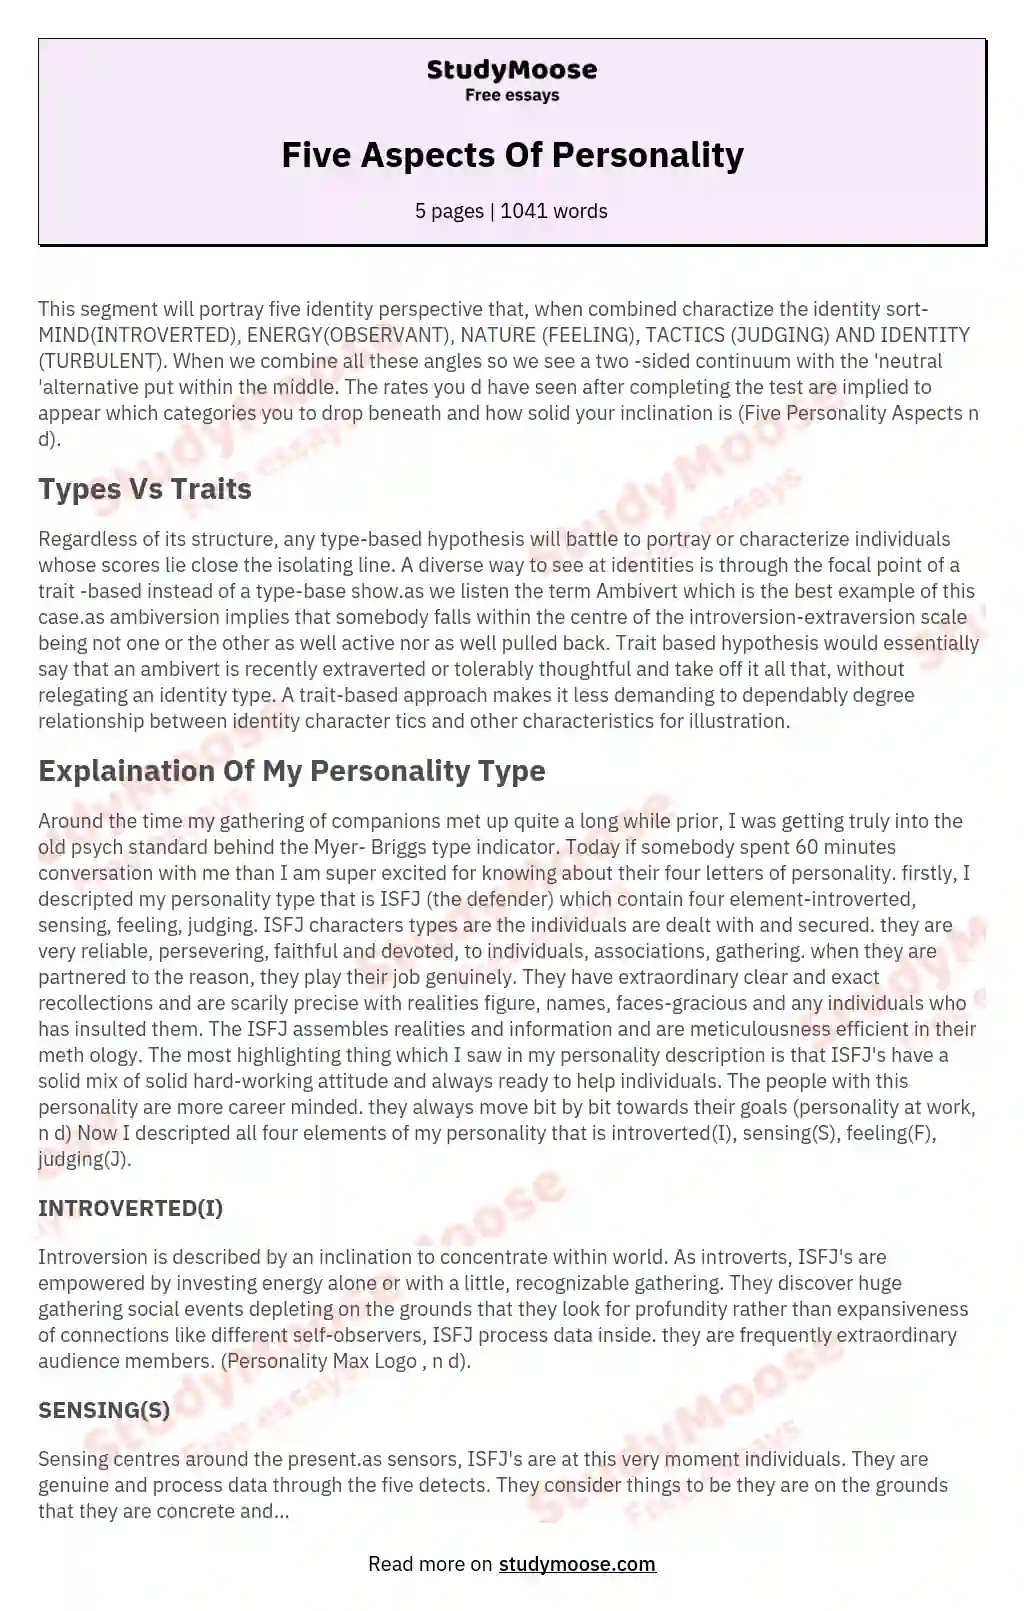 Five Aspects Of Personality essay